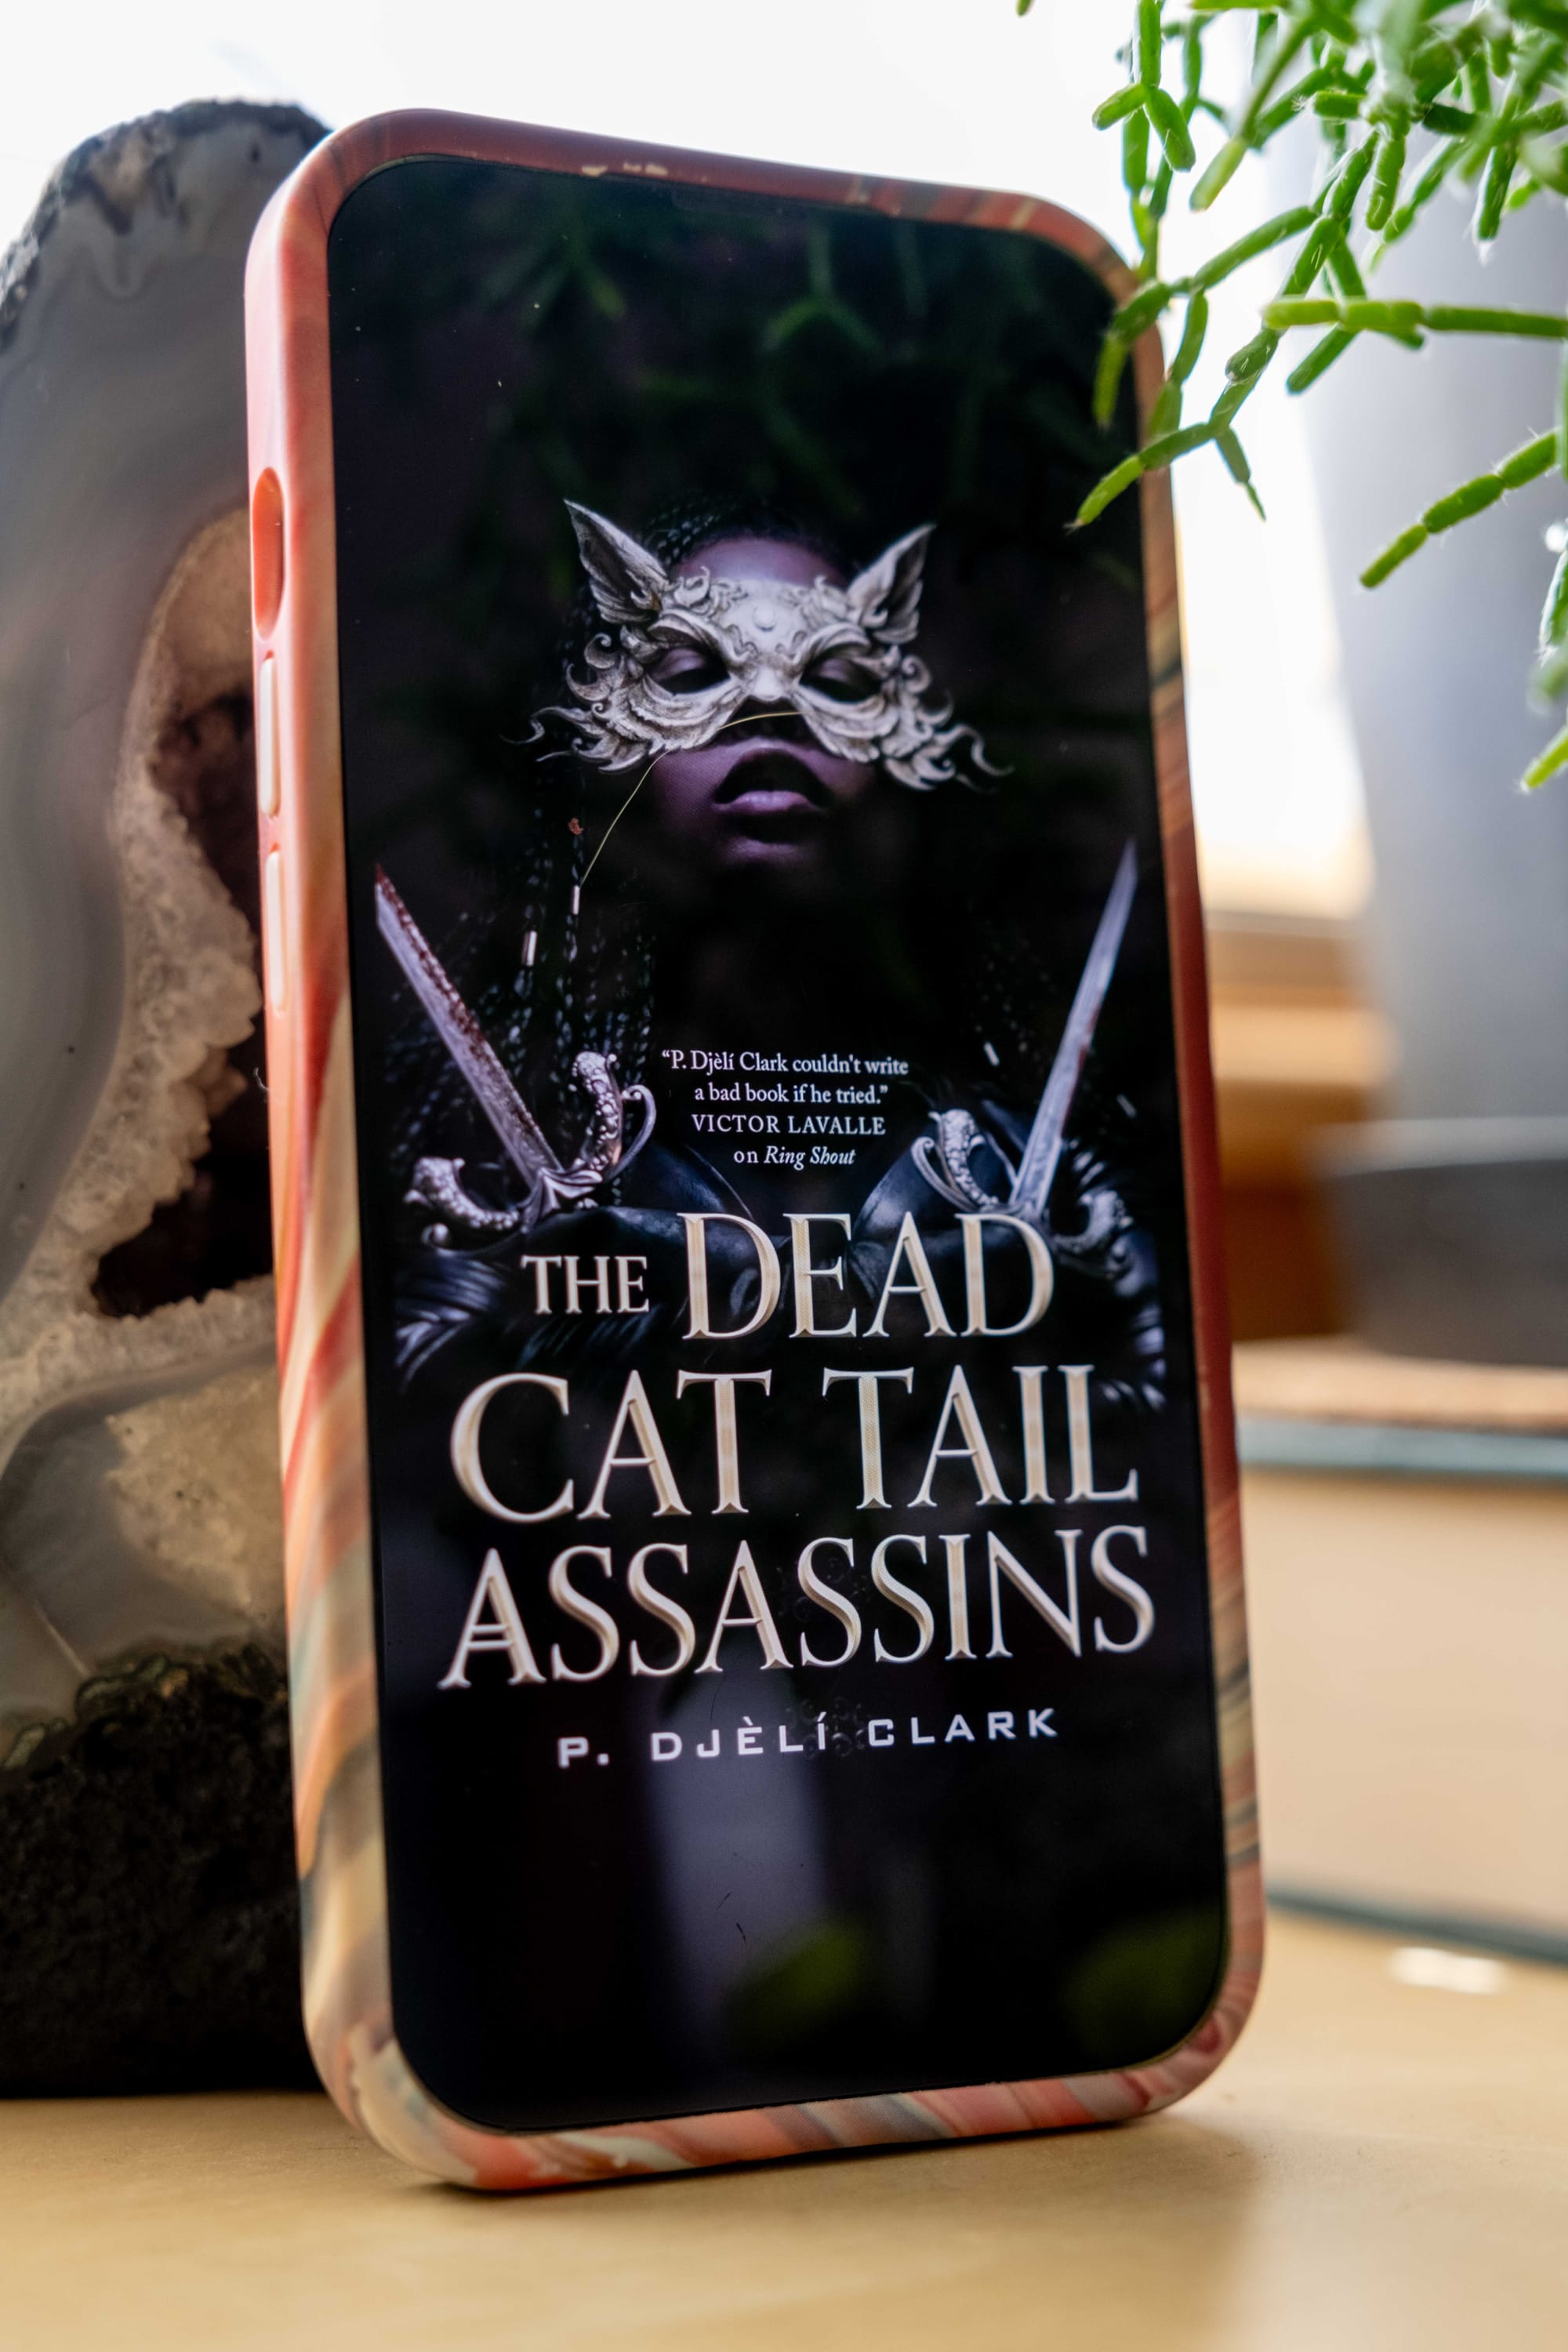 Book cover for The Dead Cat Tail Assassins by P. Djèlí Clark on an iPhone